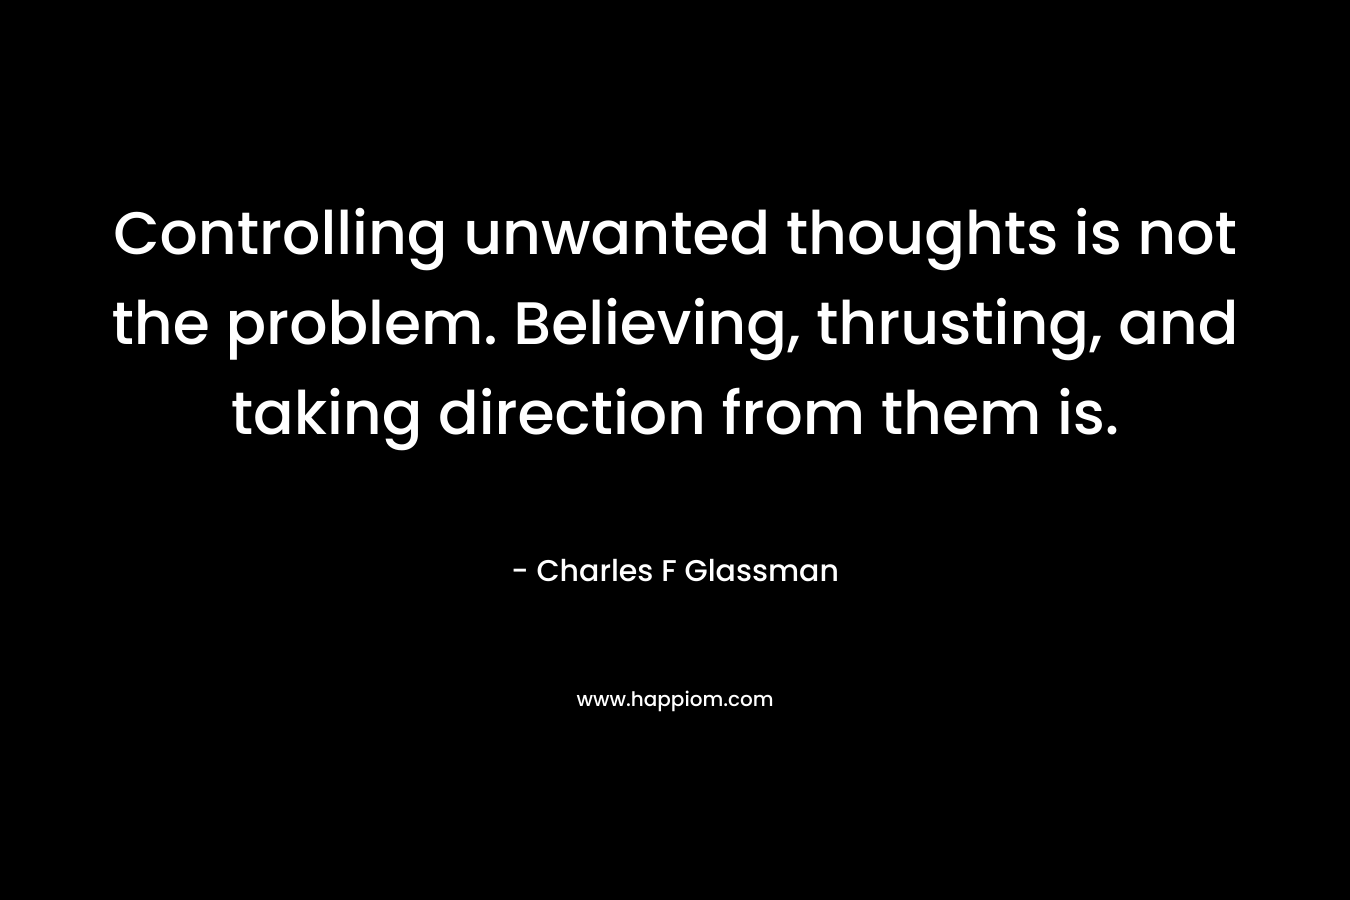 Controlling unwanted thoughts is not the problem. Believing, thrusting, and taking direction from them is. – Charles F Glassman